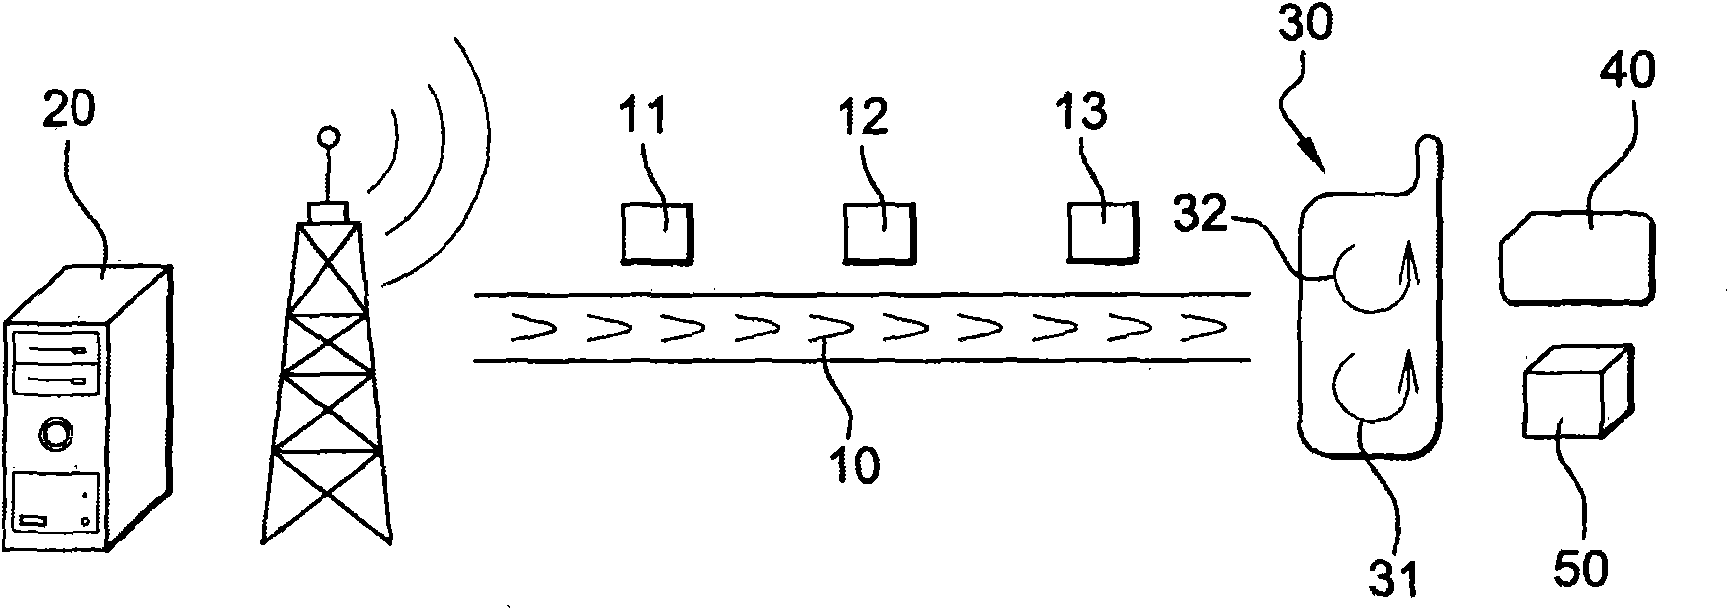 Content storing method in a mobile TV terminal for allowing more appearing channels to be available